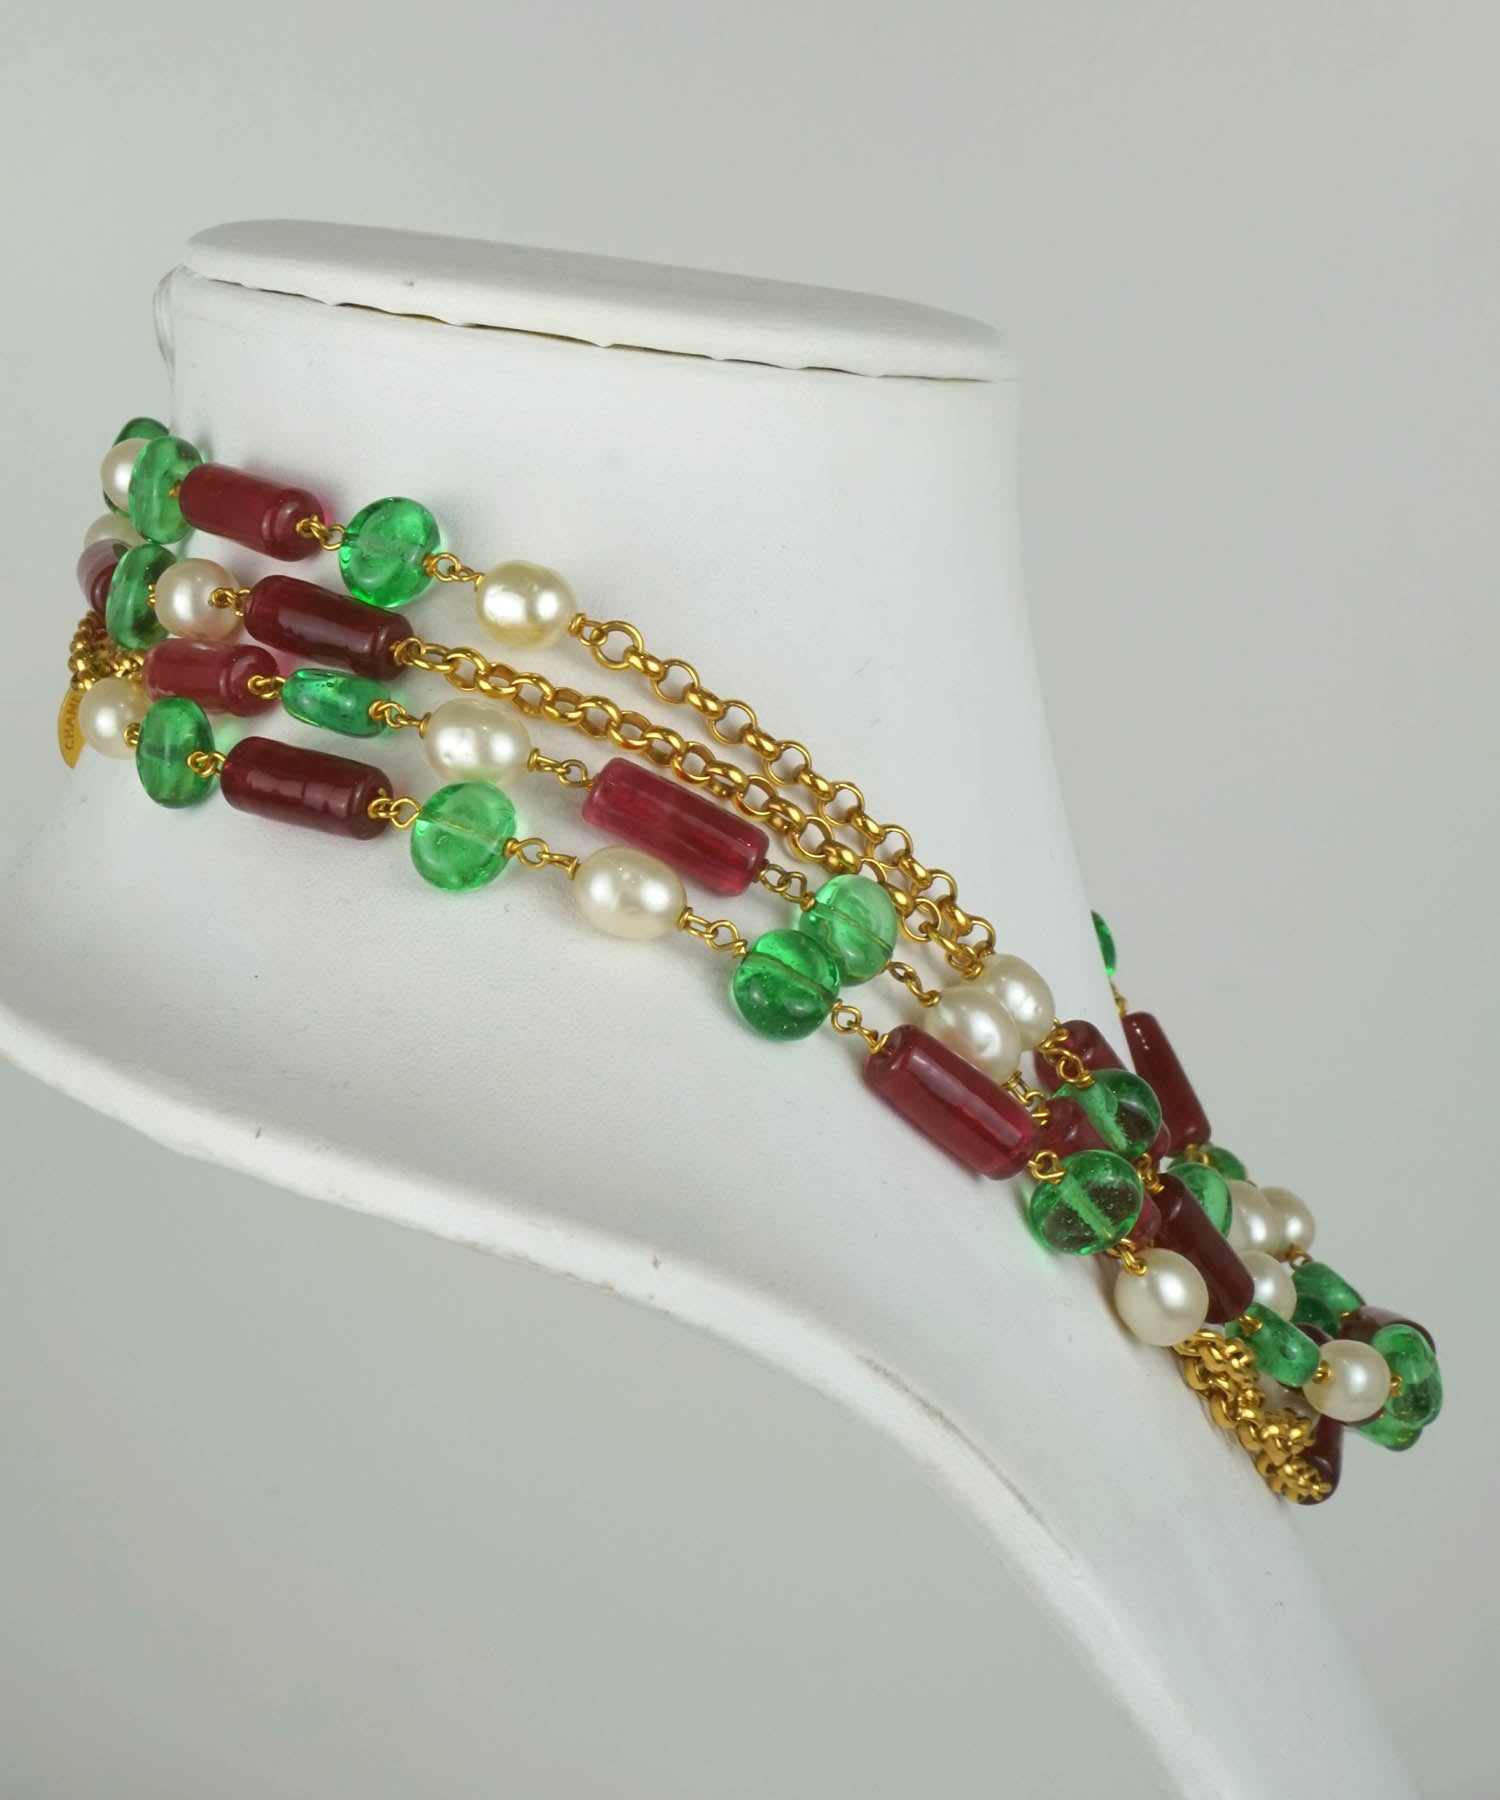 Chanel 1984 Green and Red Gripoix with Pearl Sautoir Necklace